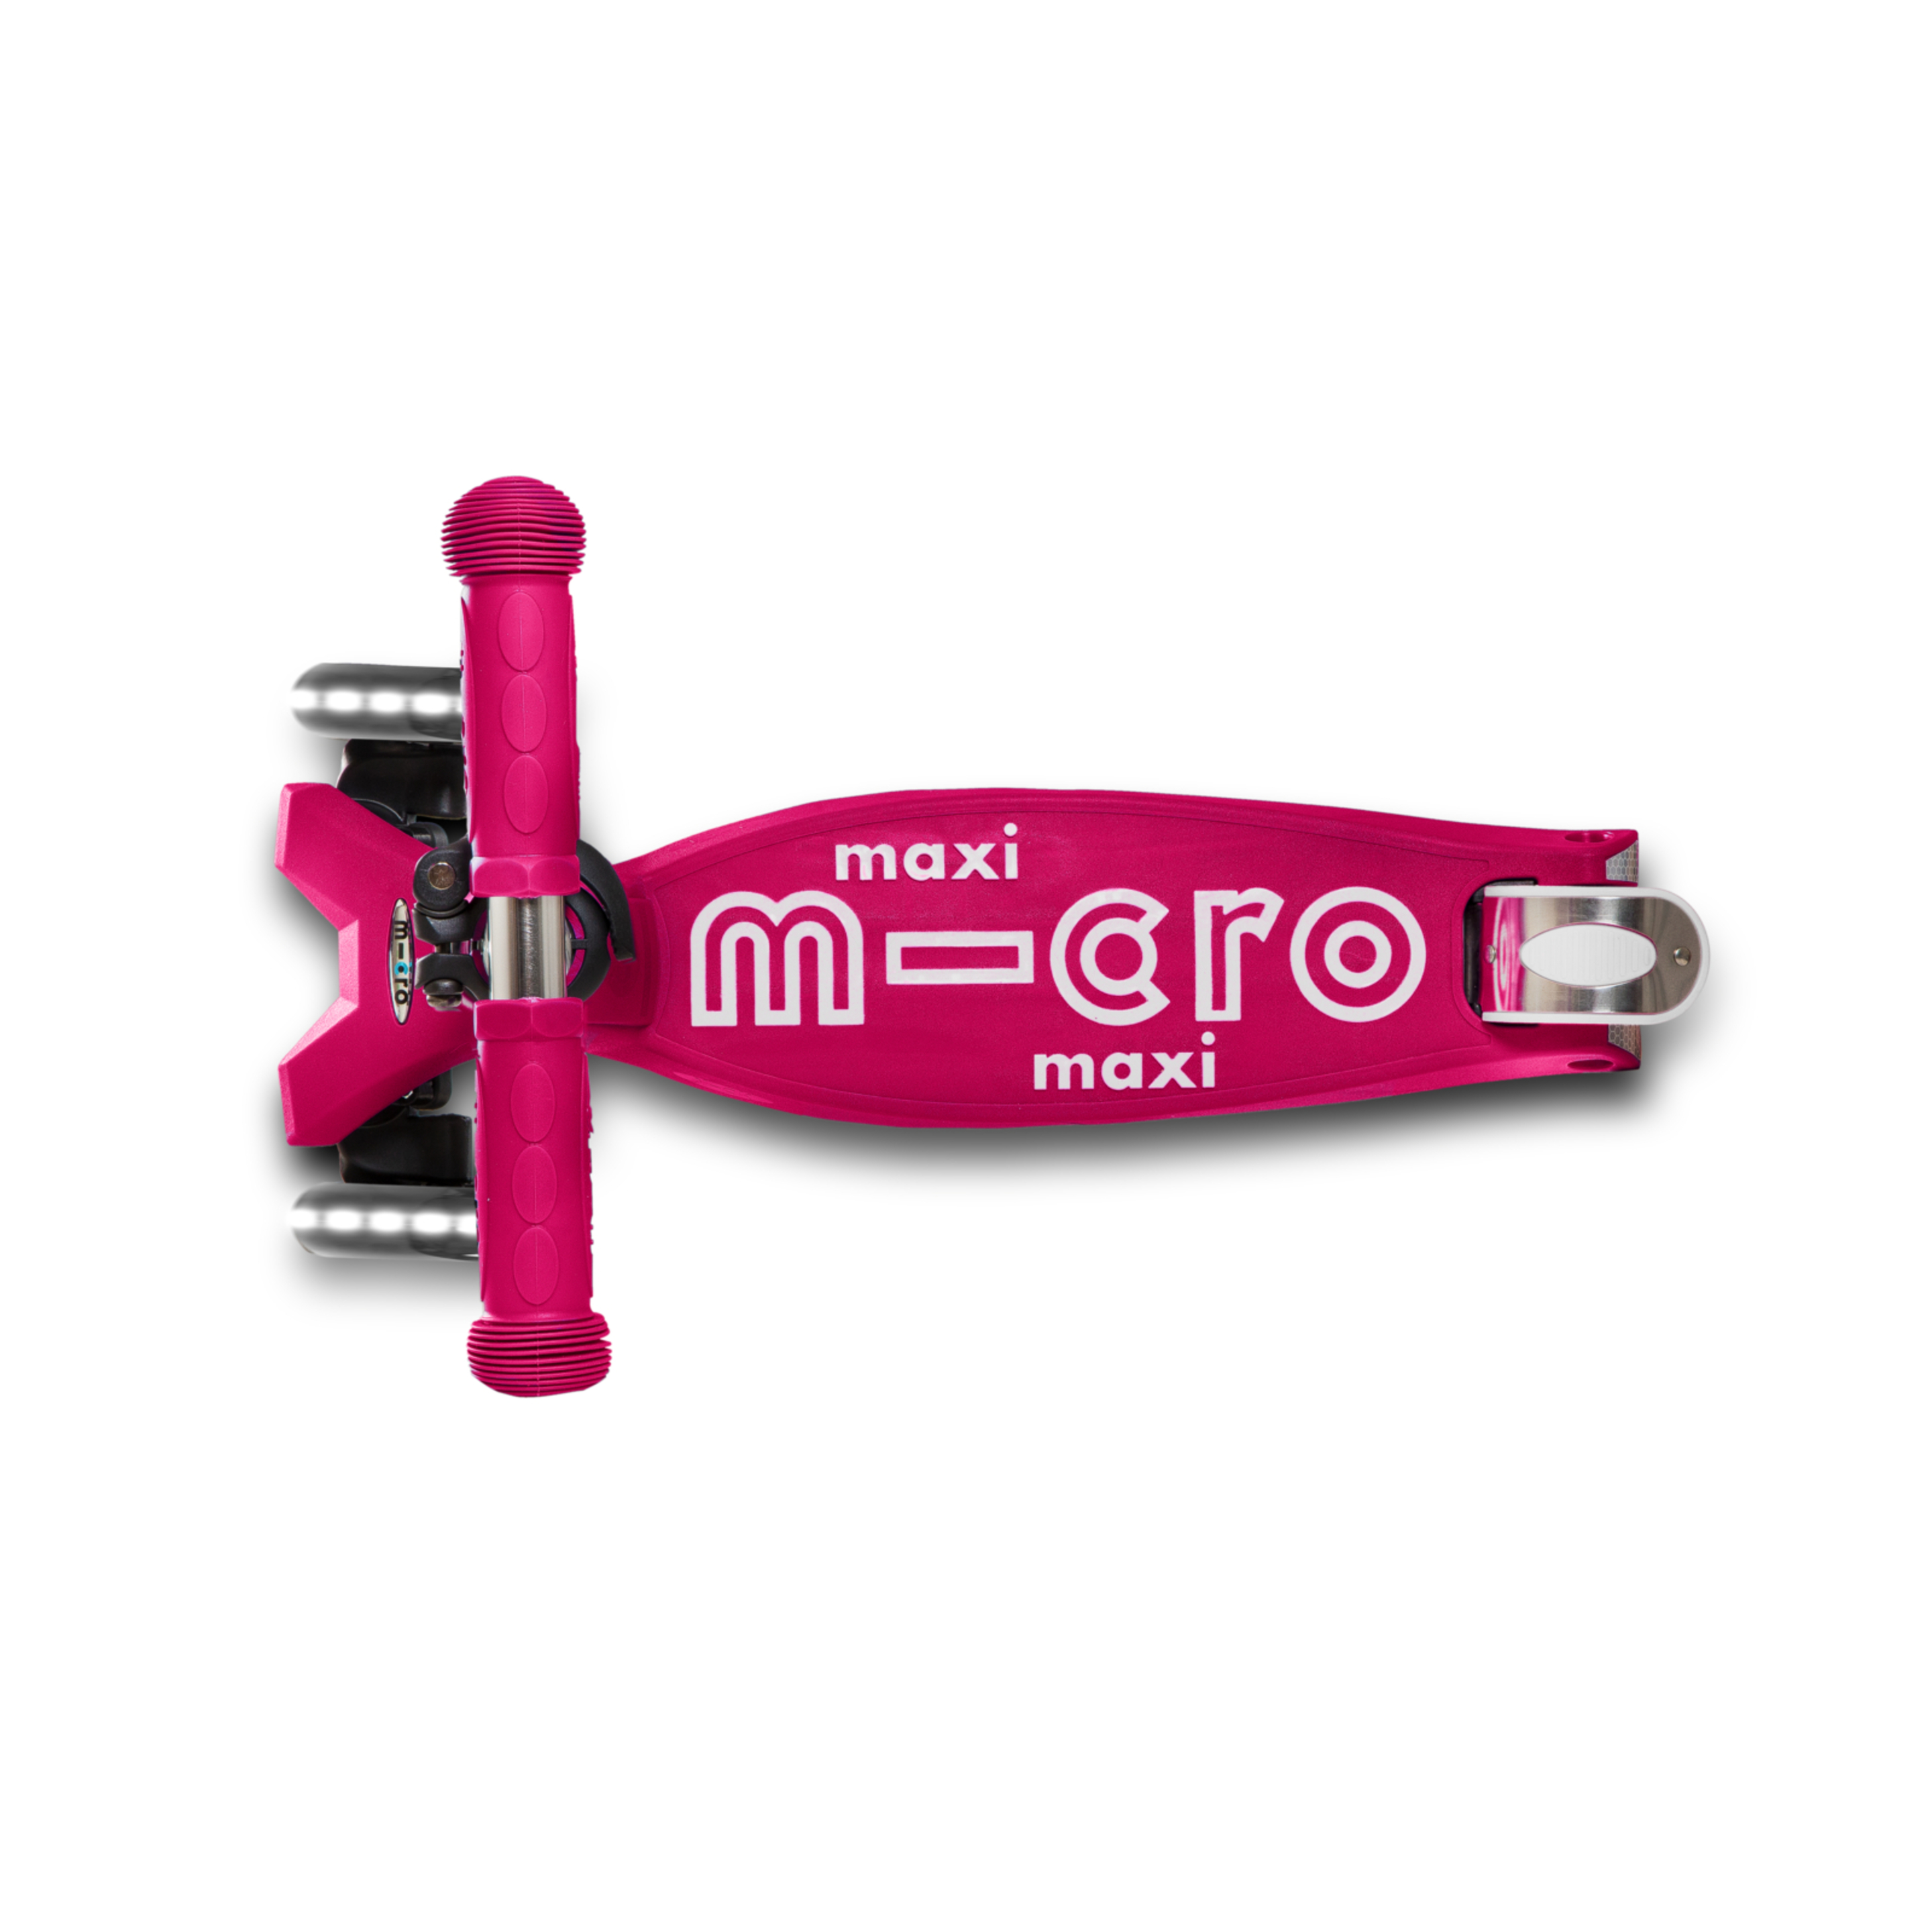 Patinete Maxi Micro Deluxe Rosa Led